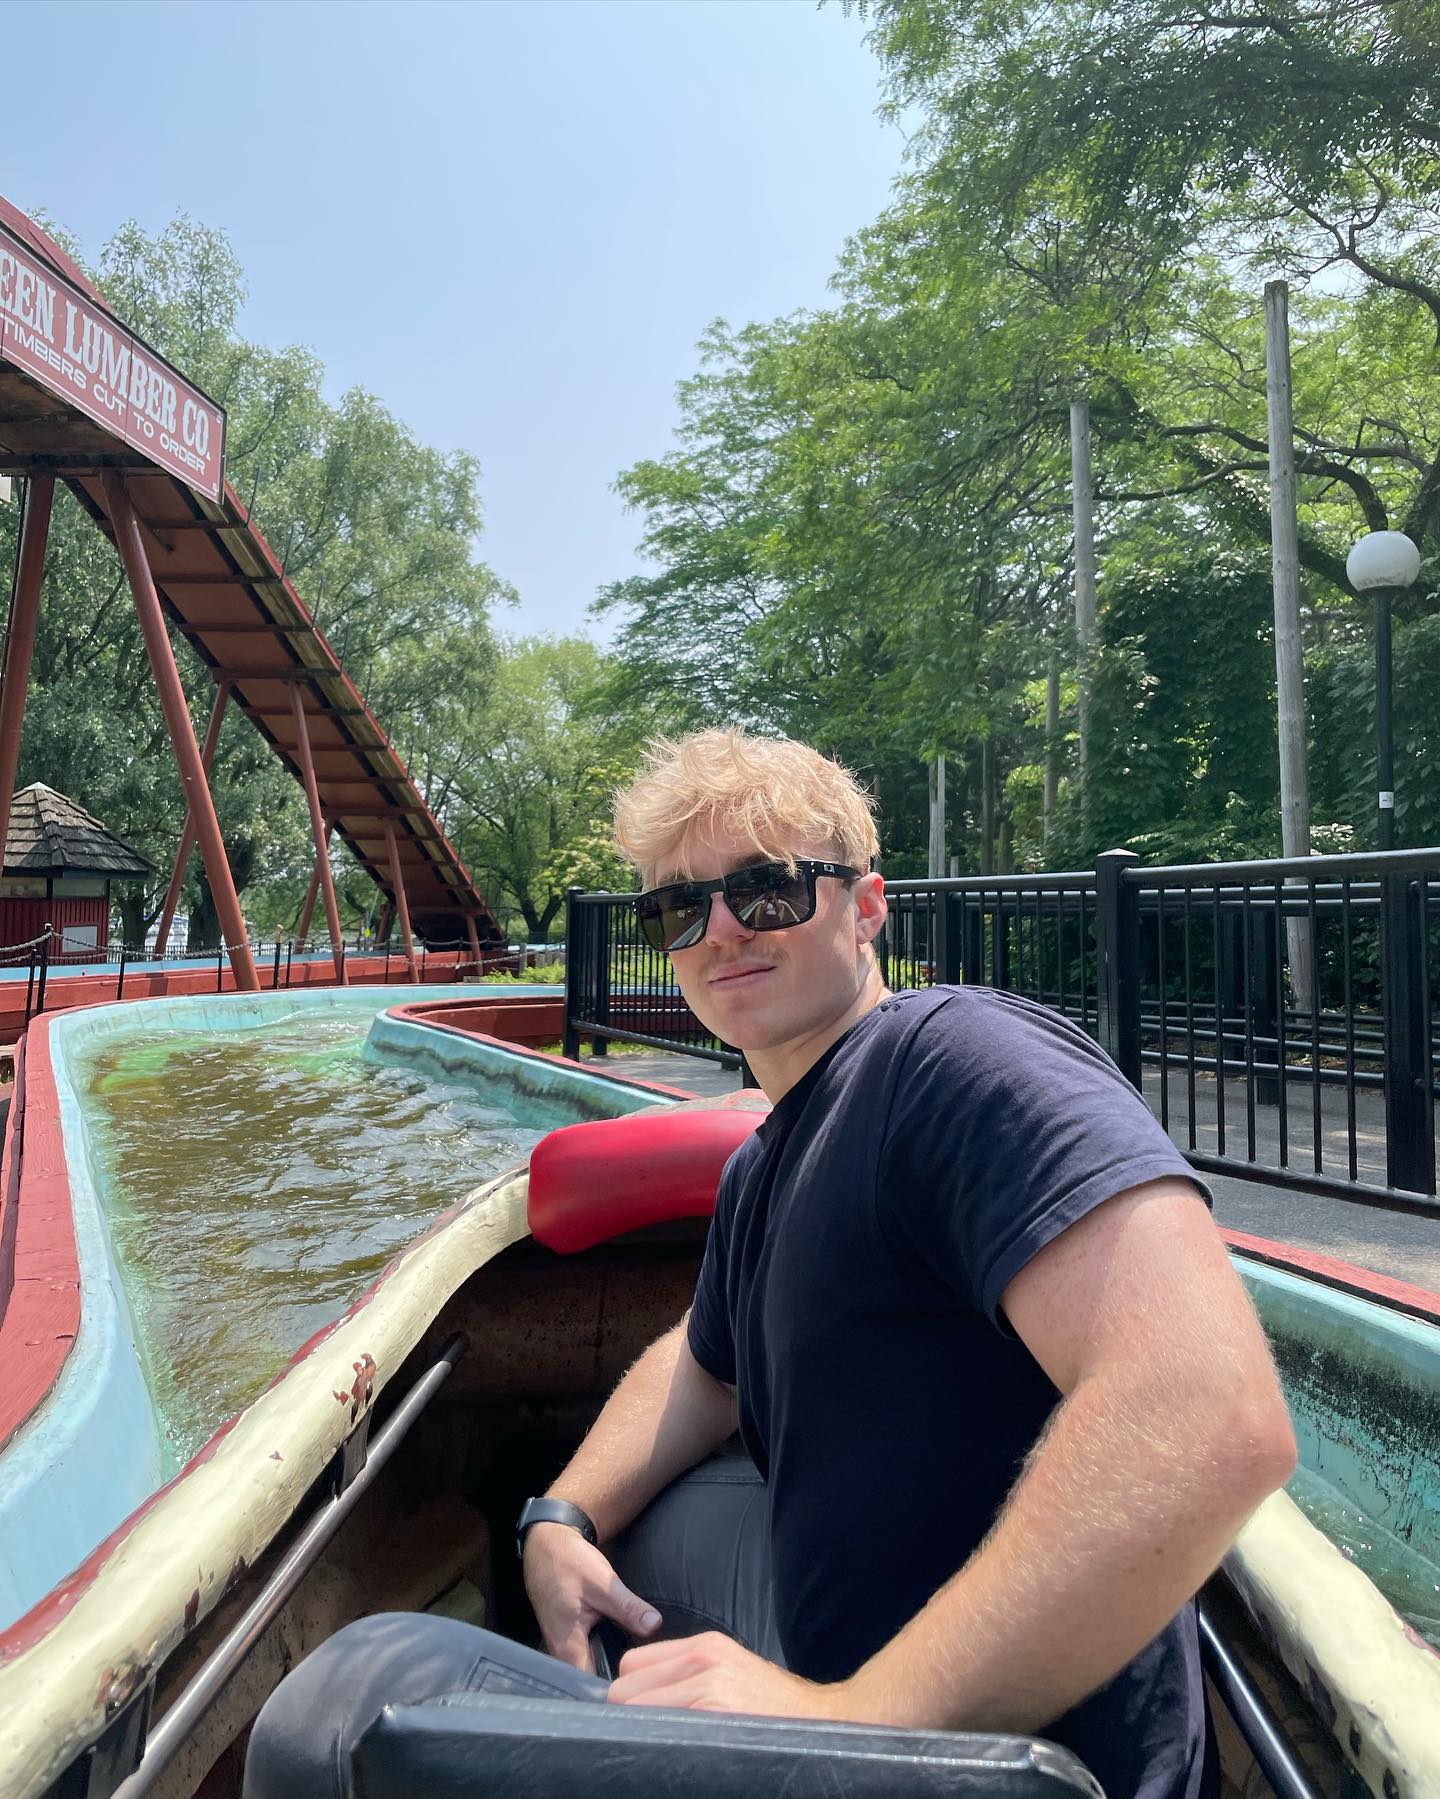 Come ride with me? 🛶 

Photo Credit @justydiaz 

#toronto #canada #northamerica #summer #summervibes #pridemonth #logflume